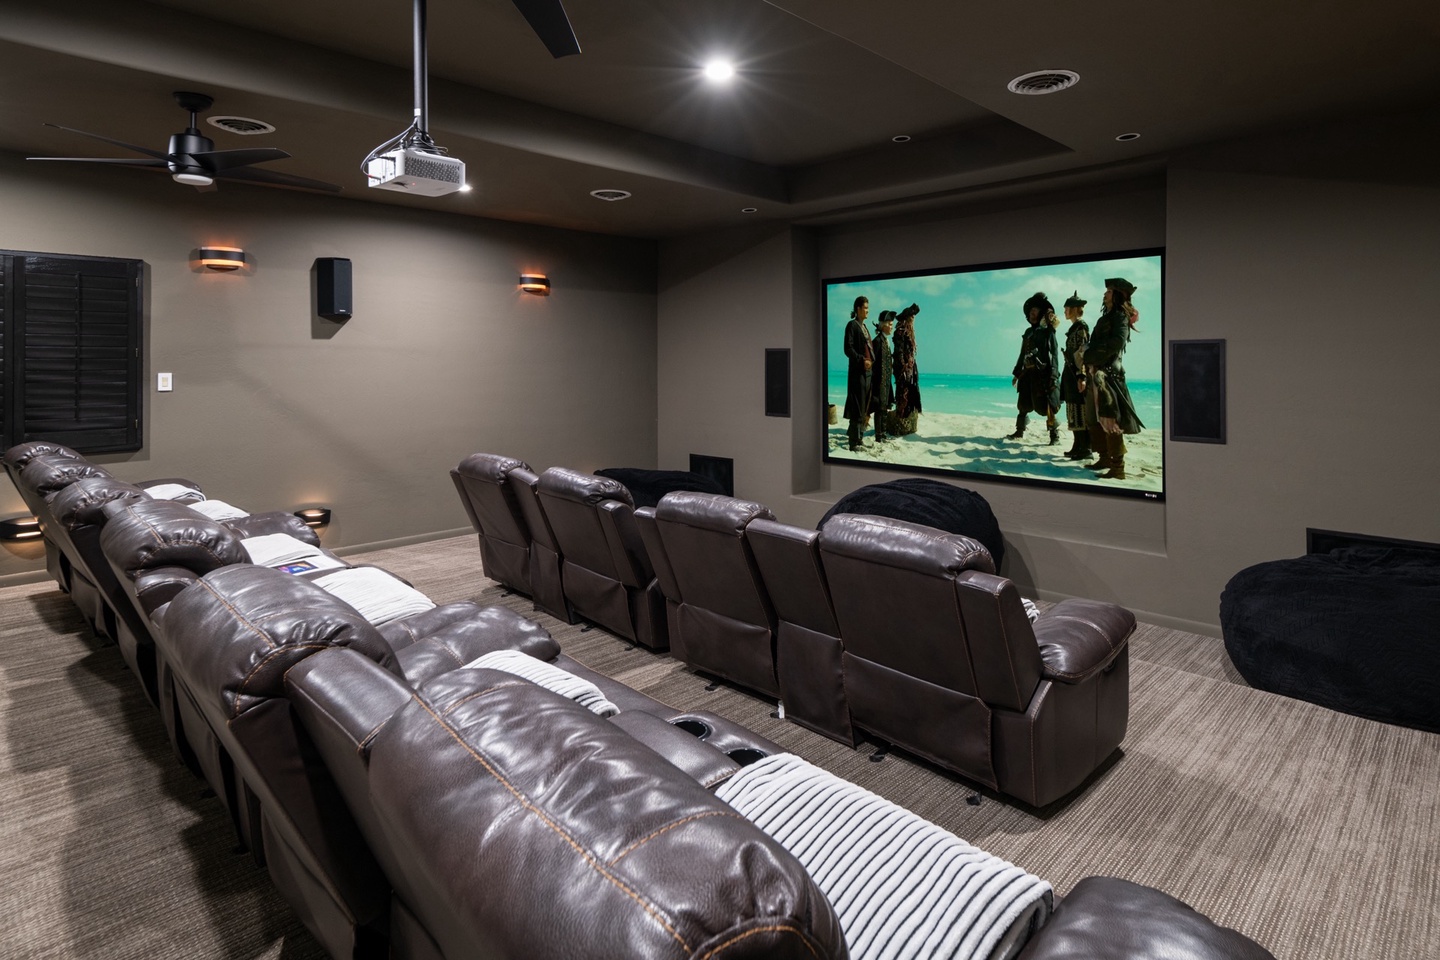 Your own personal theatre